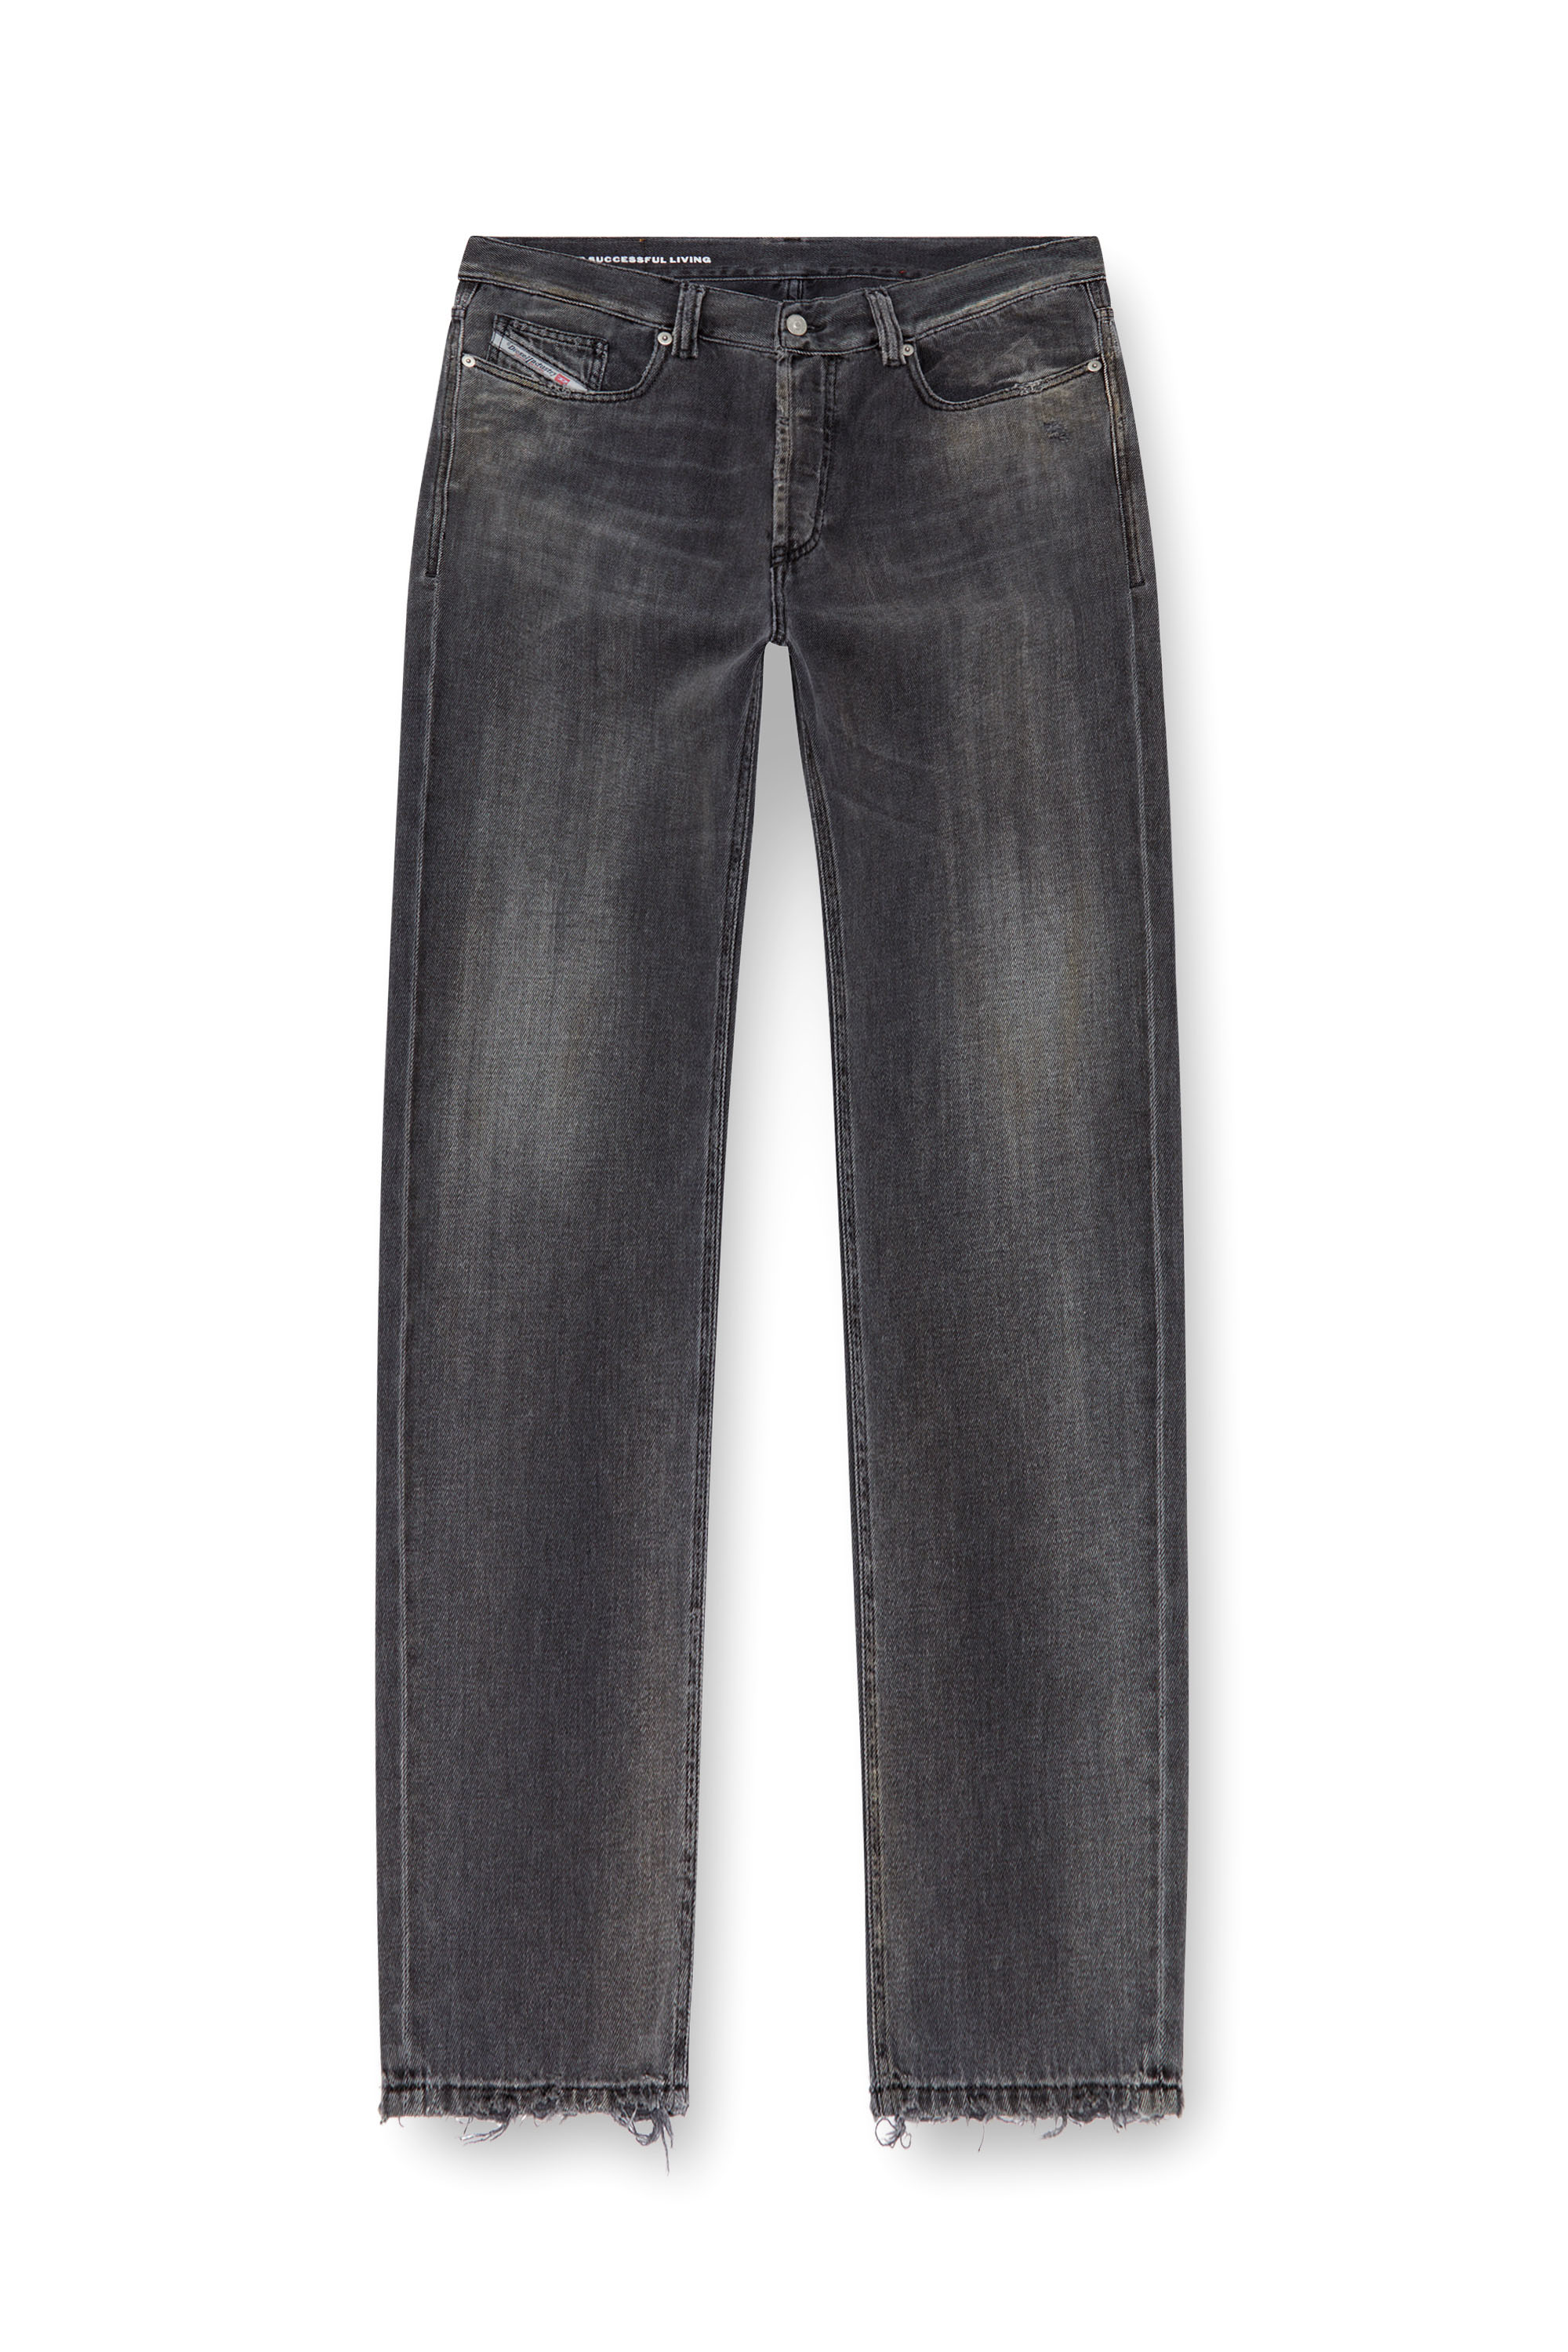 Diesel - Straight Jeans 2010 D-Macs 09K14, Hombre Straight Jeans - 2010 D-Macs in Negro - Image 5